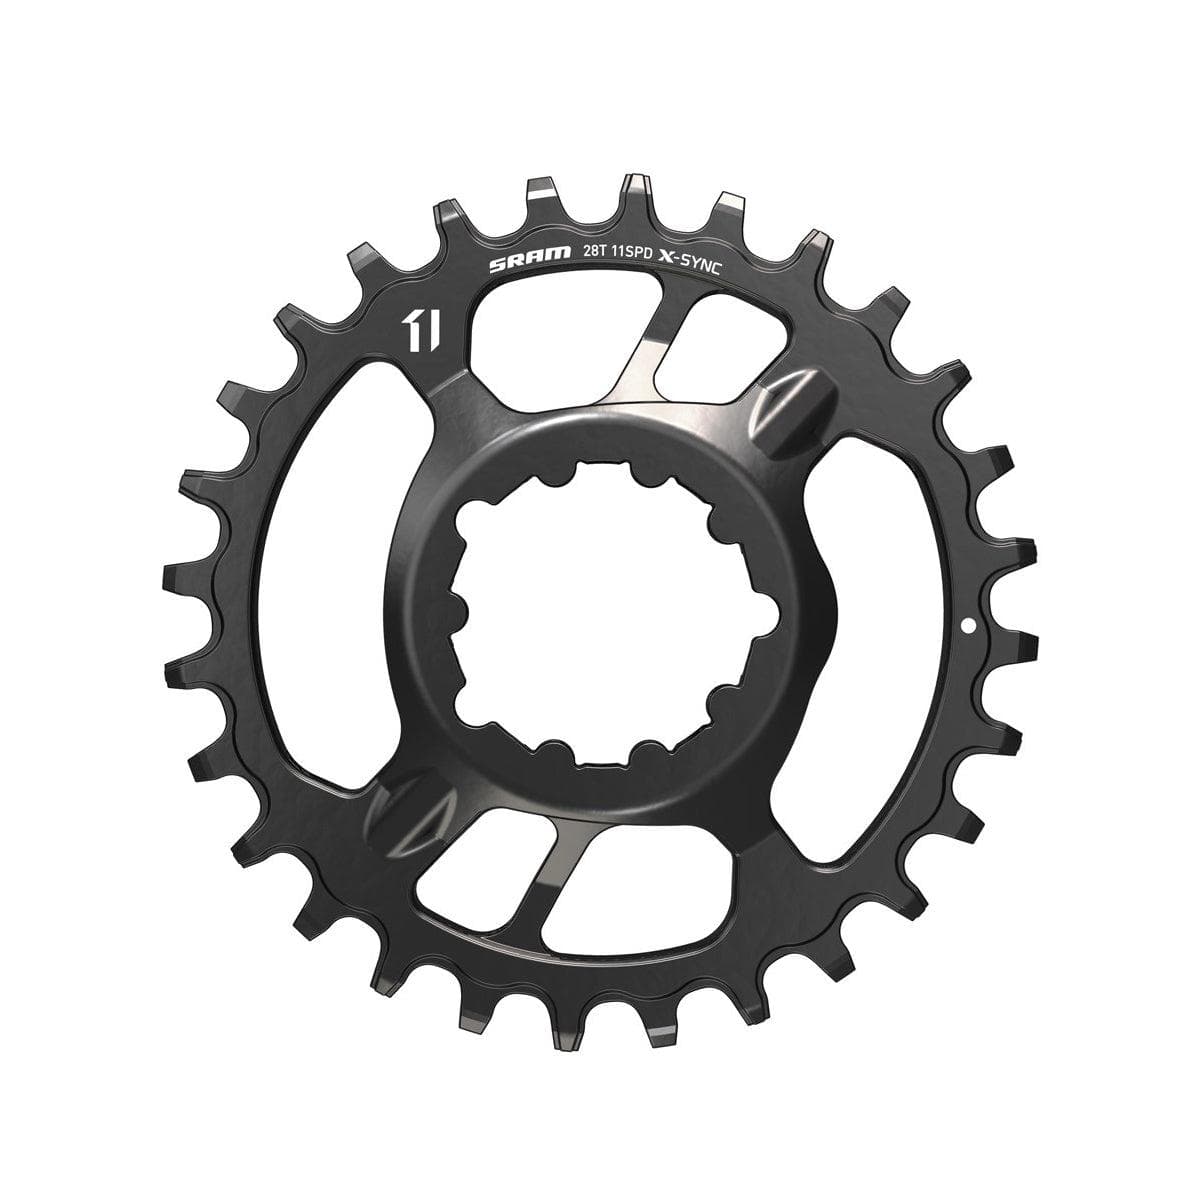 Sram Chain Ring X-Sync 28T Direct Mount 3Mm Offset Boost Alum 11 Speed - Boost Drivetrain Only: Black 11Spd 28T